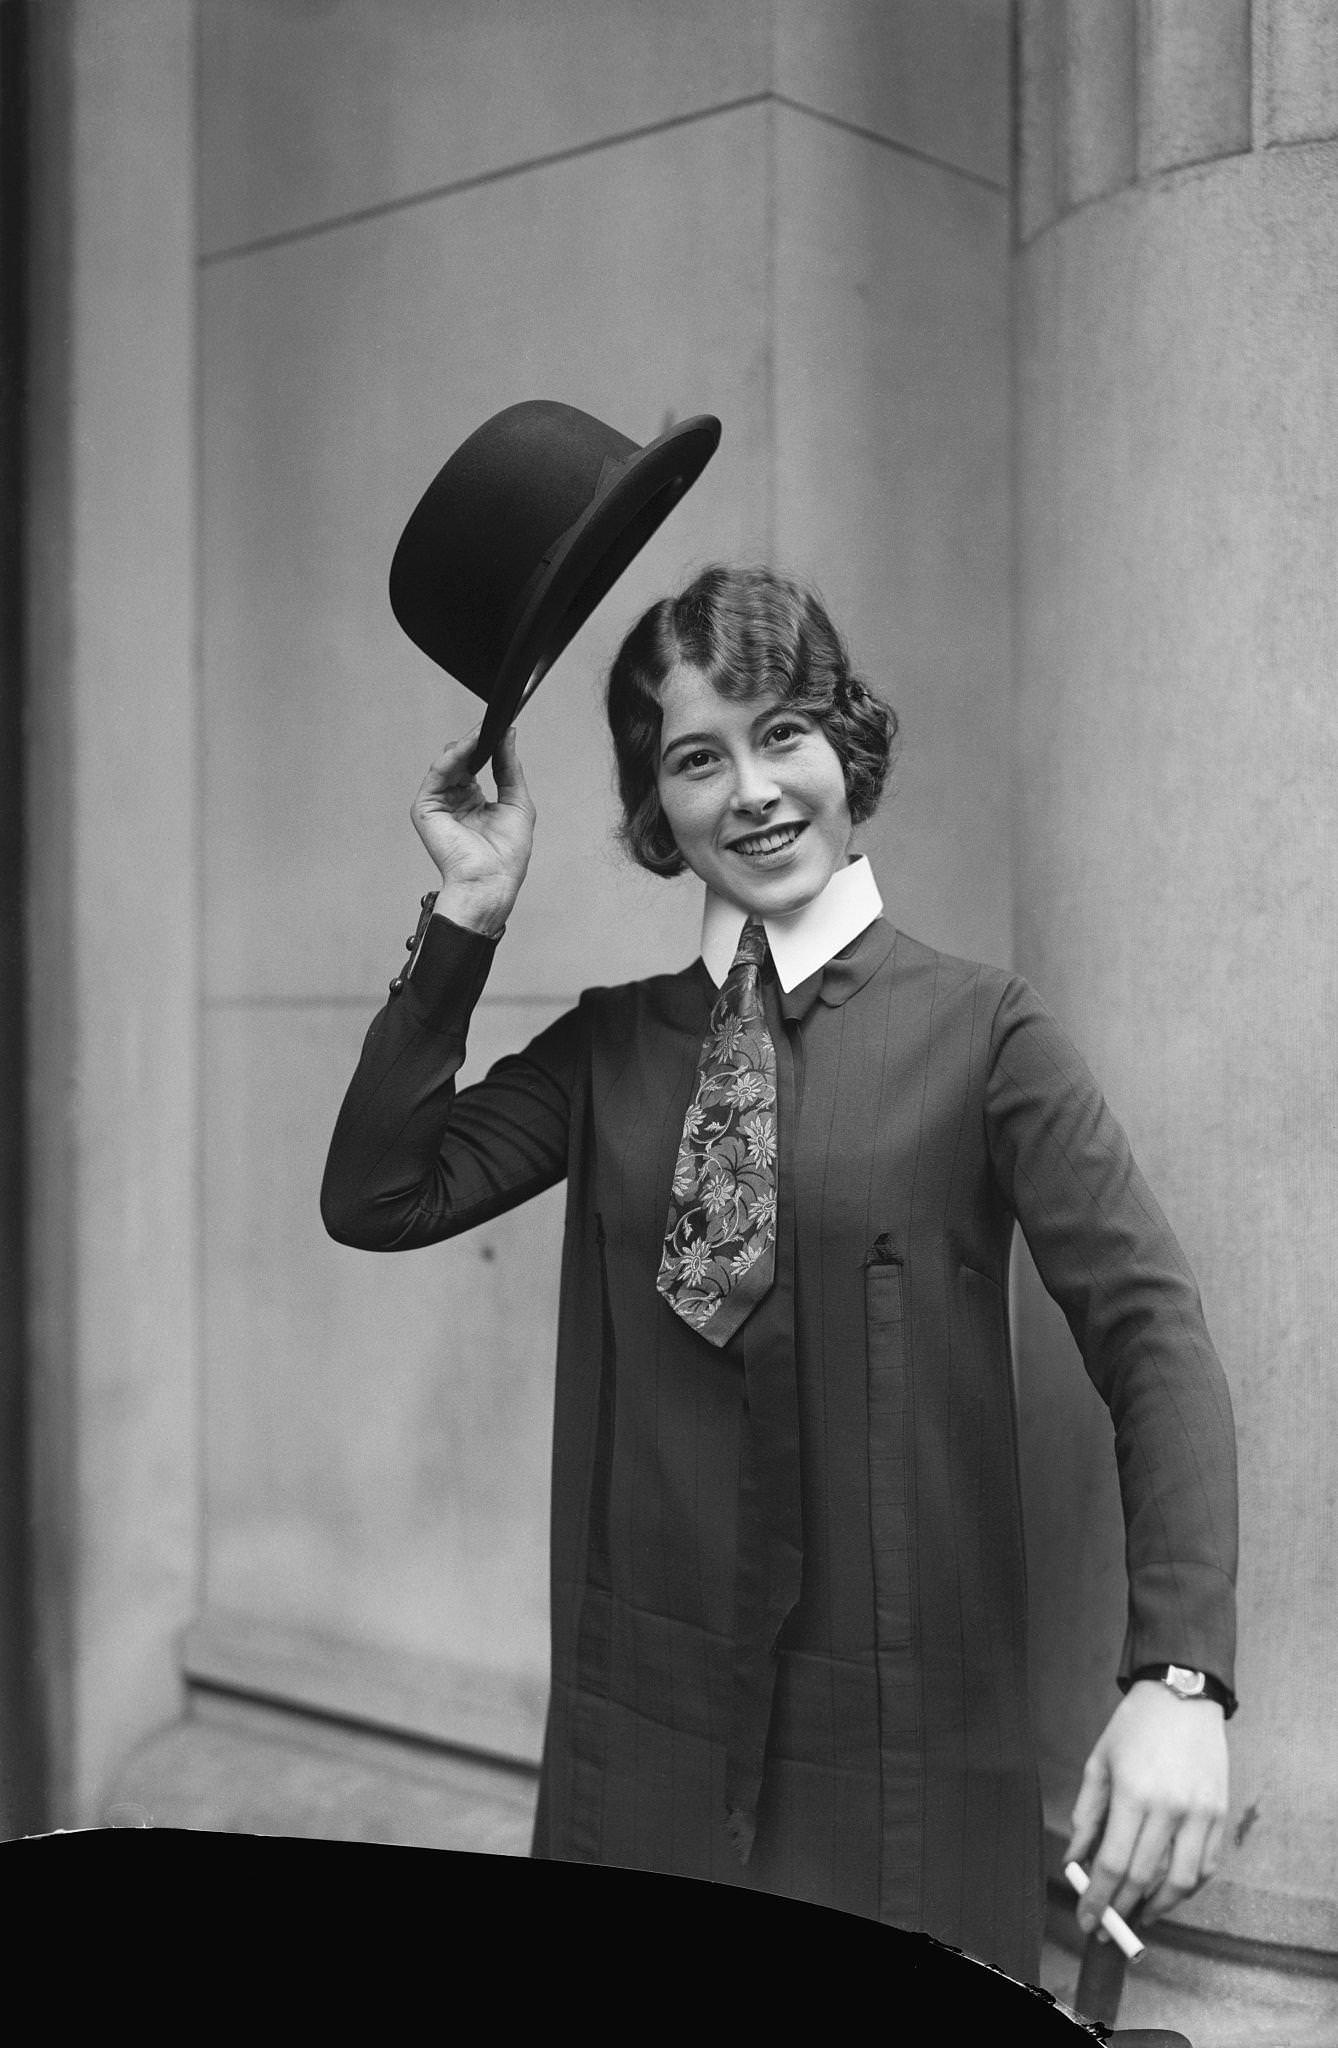 Flapper with Necktie and Bowler Hat, London 1925: Embracing Bold Fashion with a Cigarette